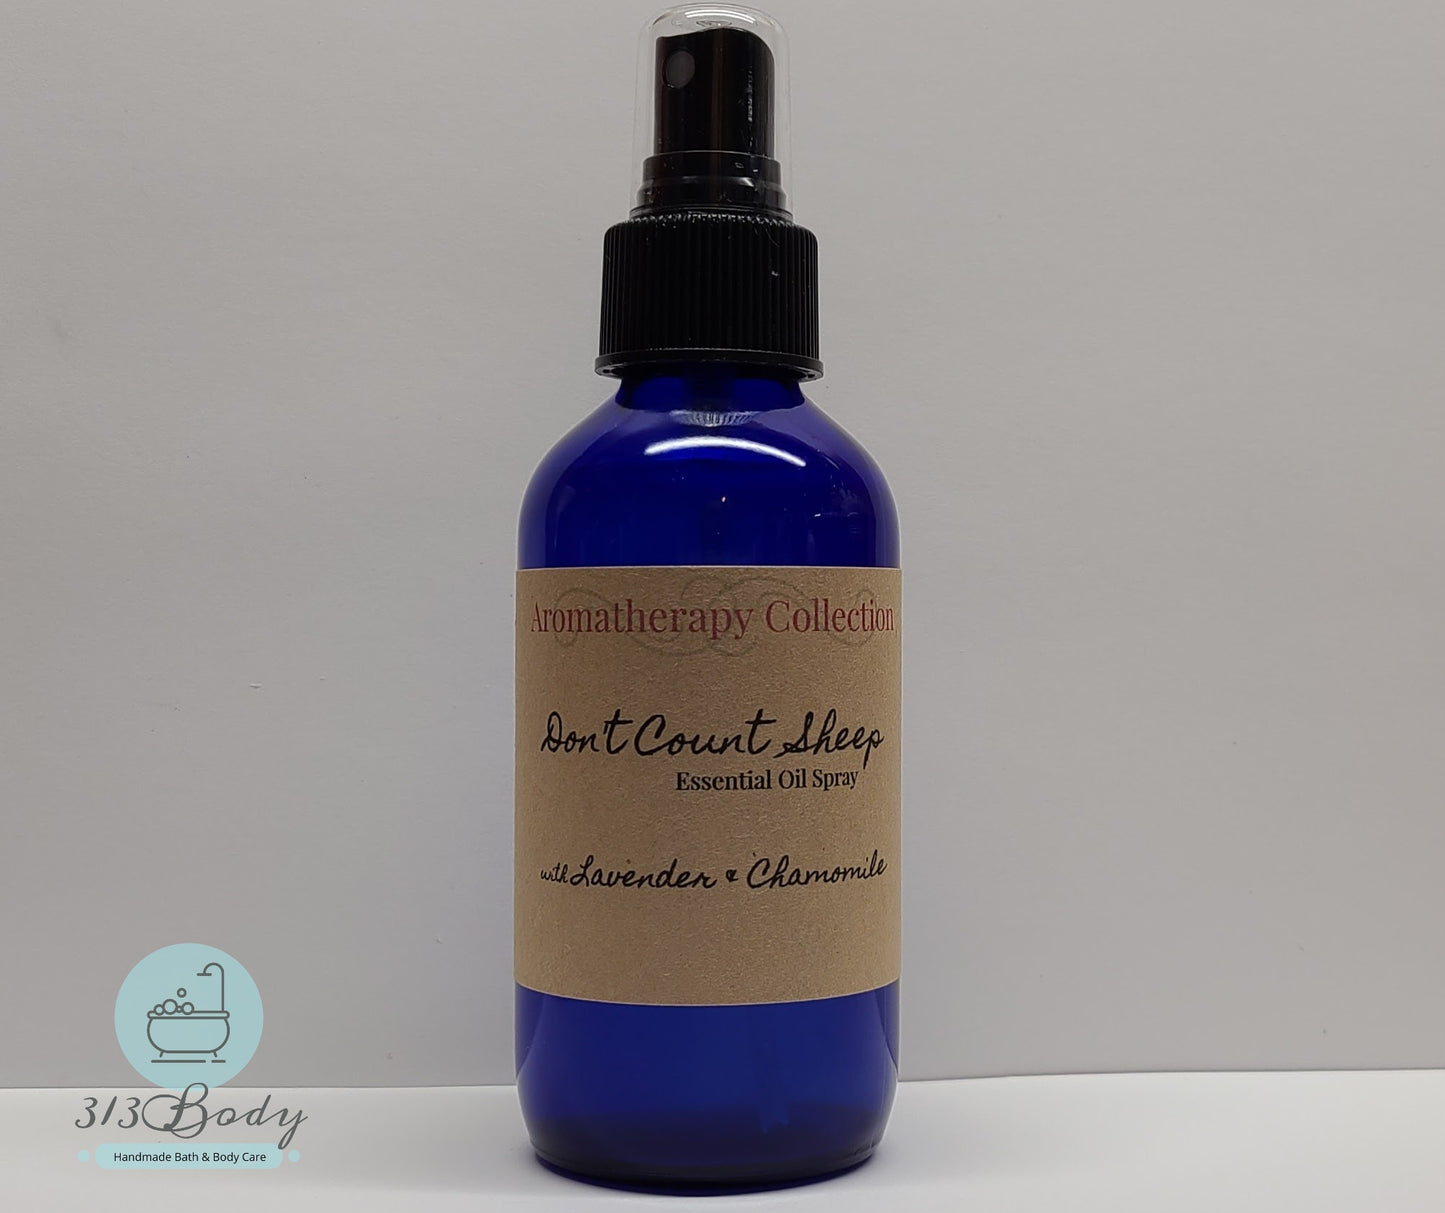 Don't Count Sheep Essential Oil Spray - Lavender and Chamomile